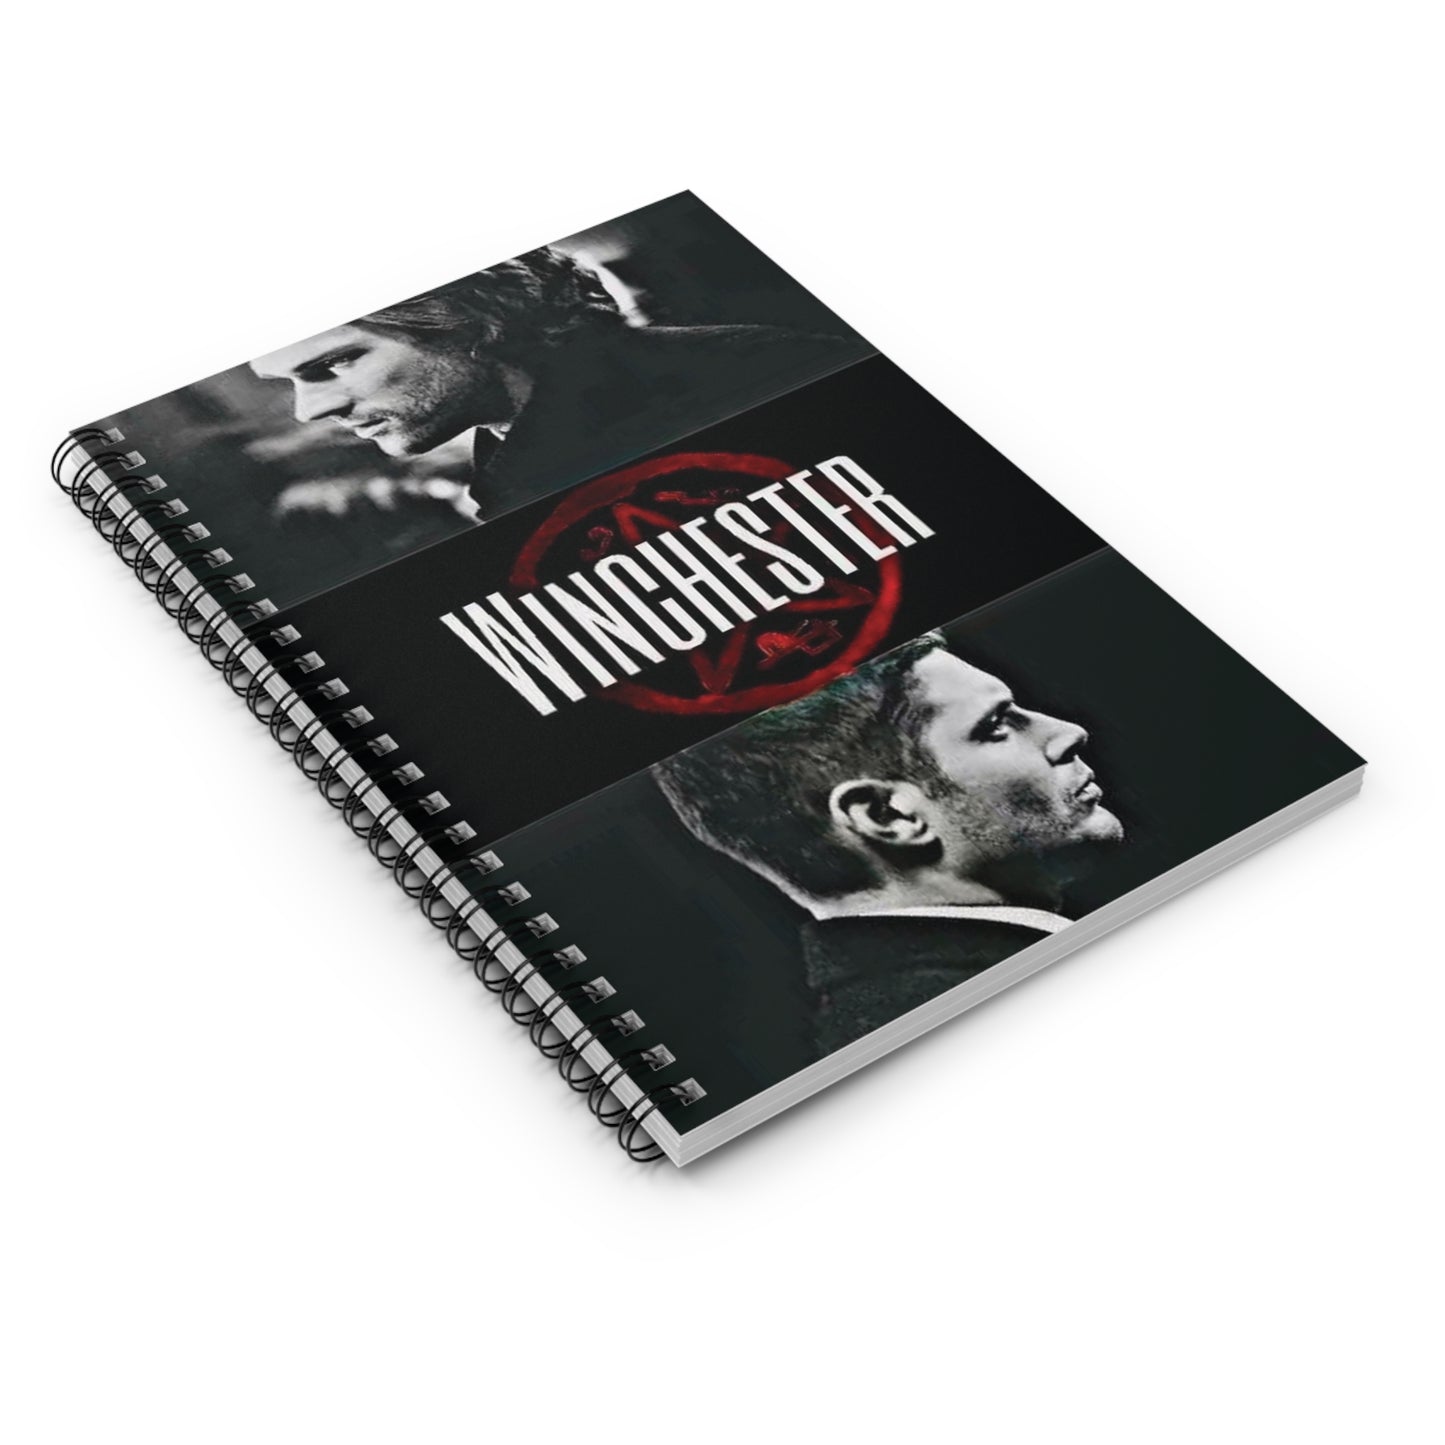 Winchester Brothers Spiral Notebook - Ruled Line